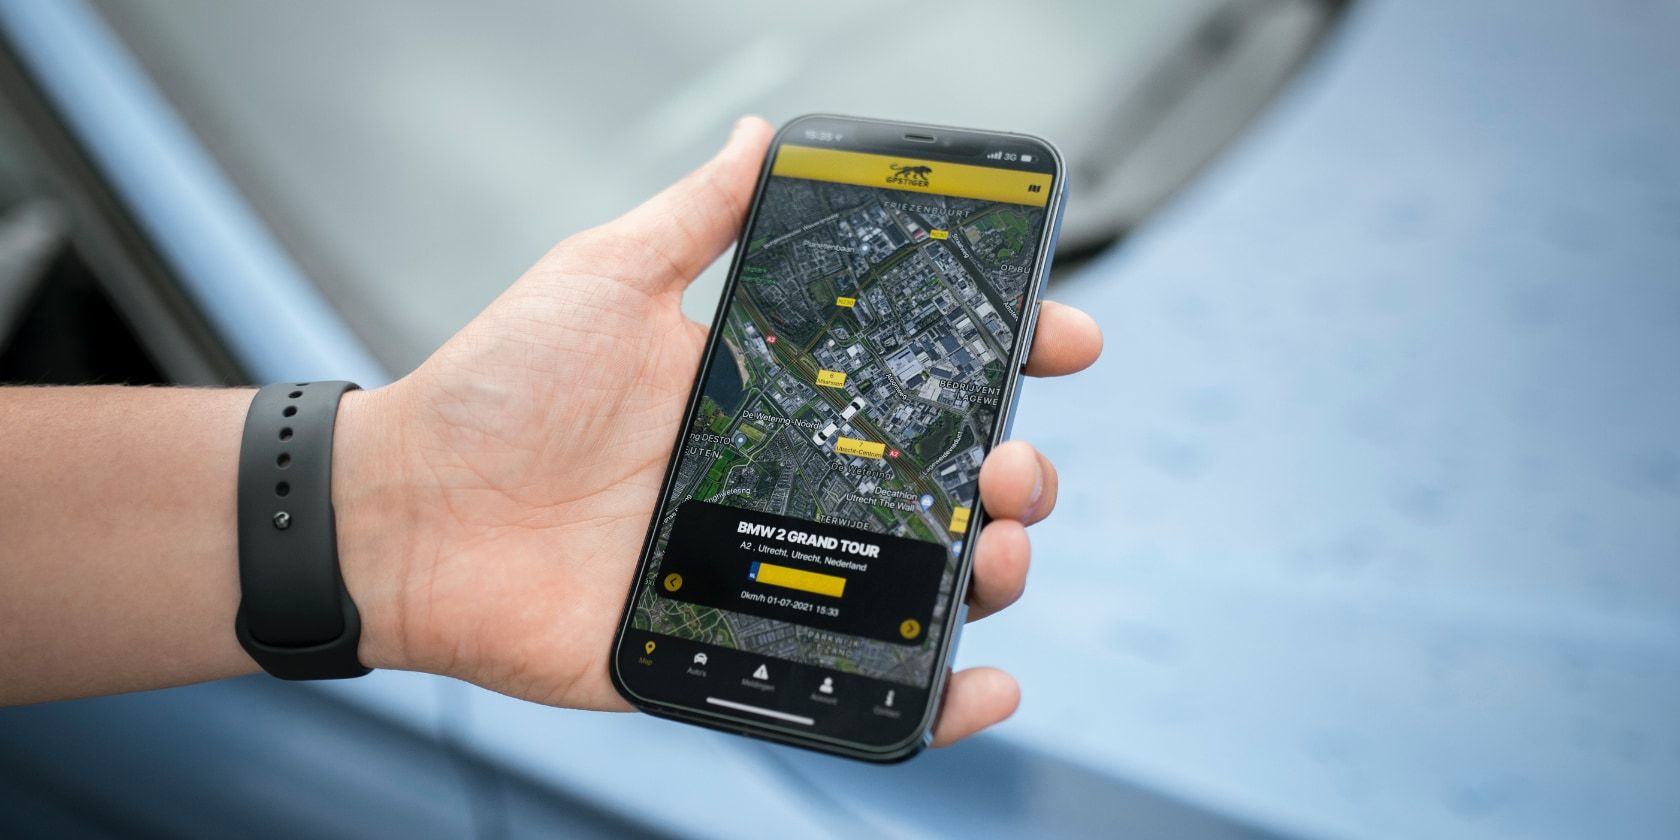 How to Use an Android Phone as a GPS Tracker